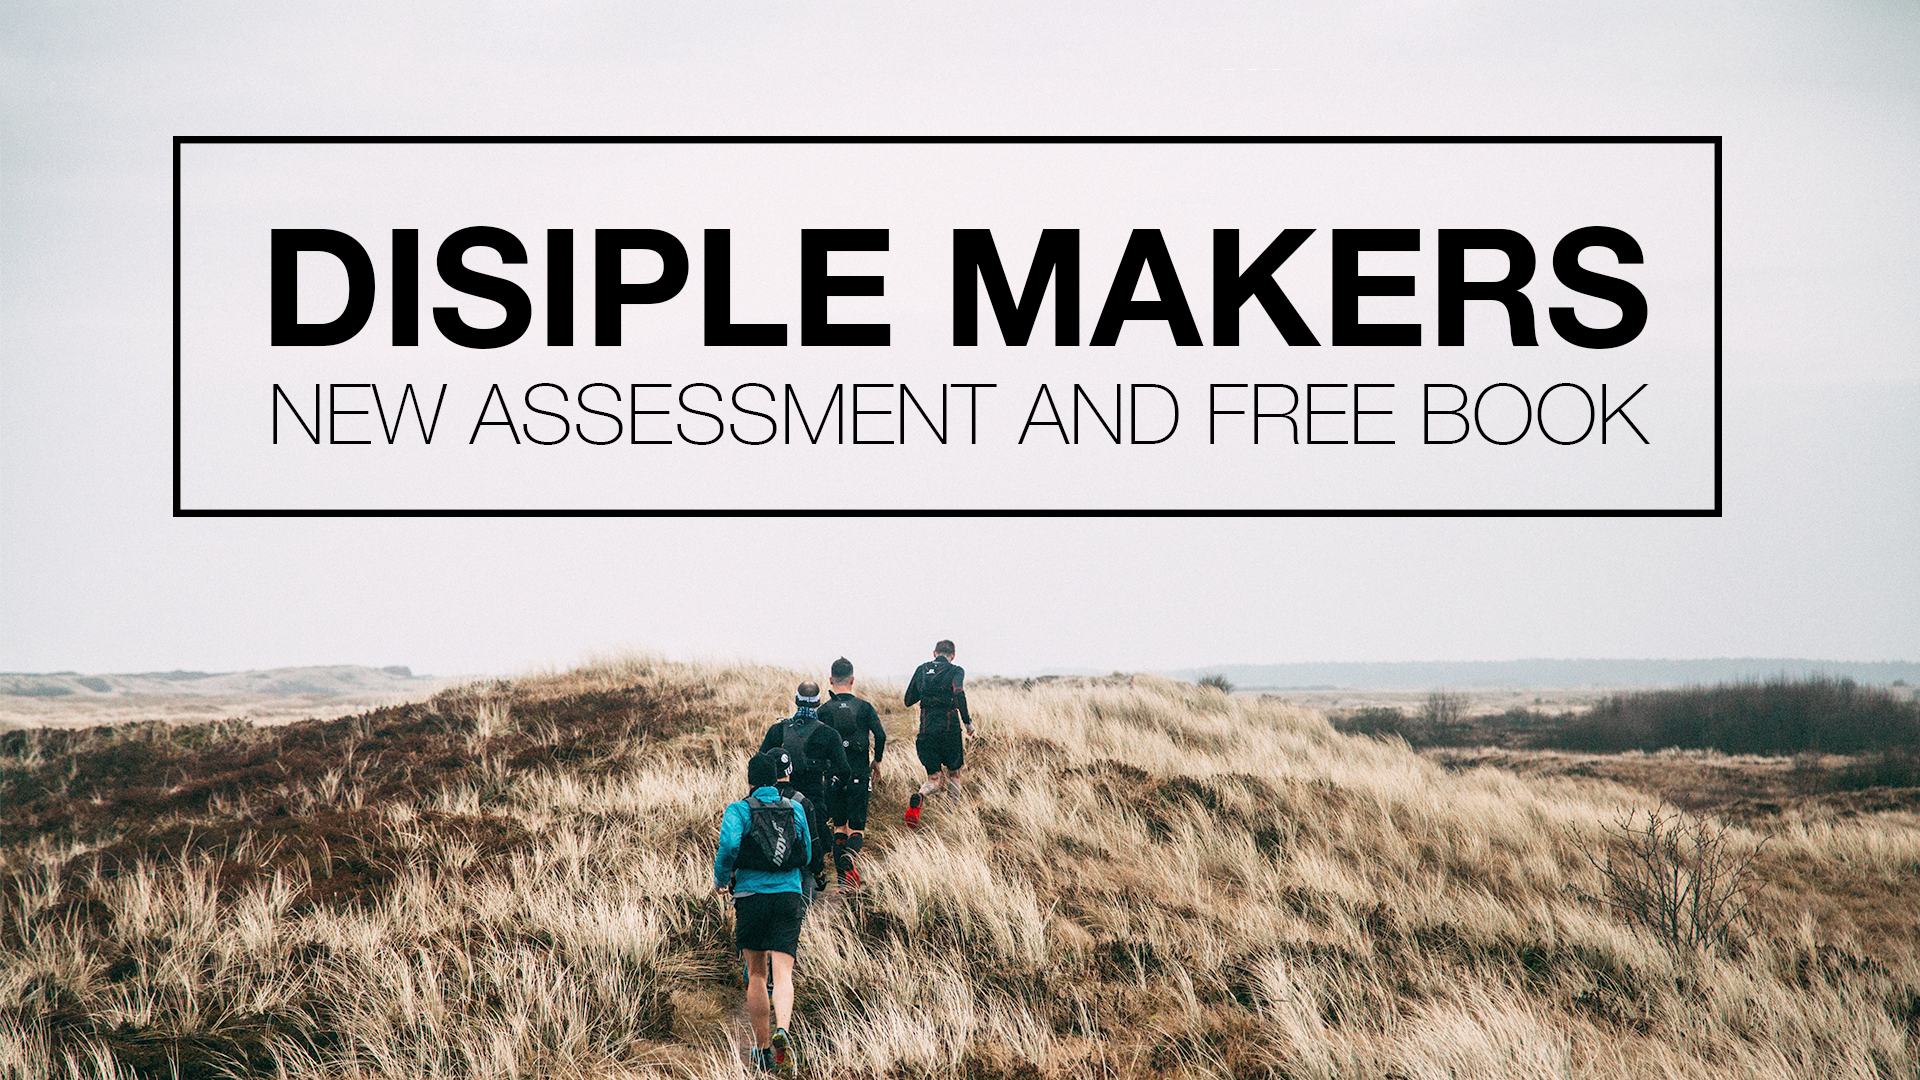 New Assessment and Free Book